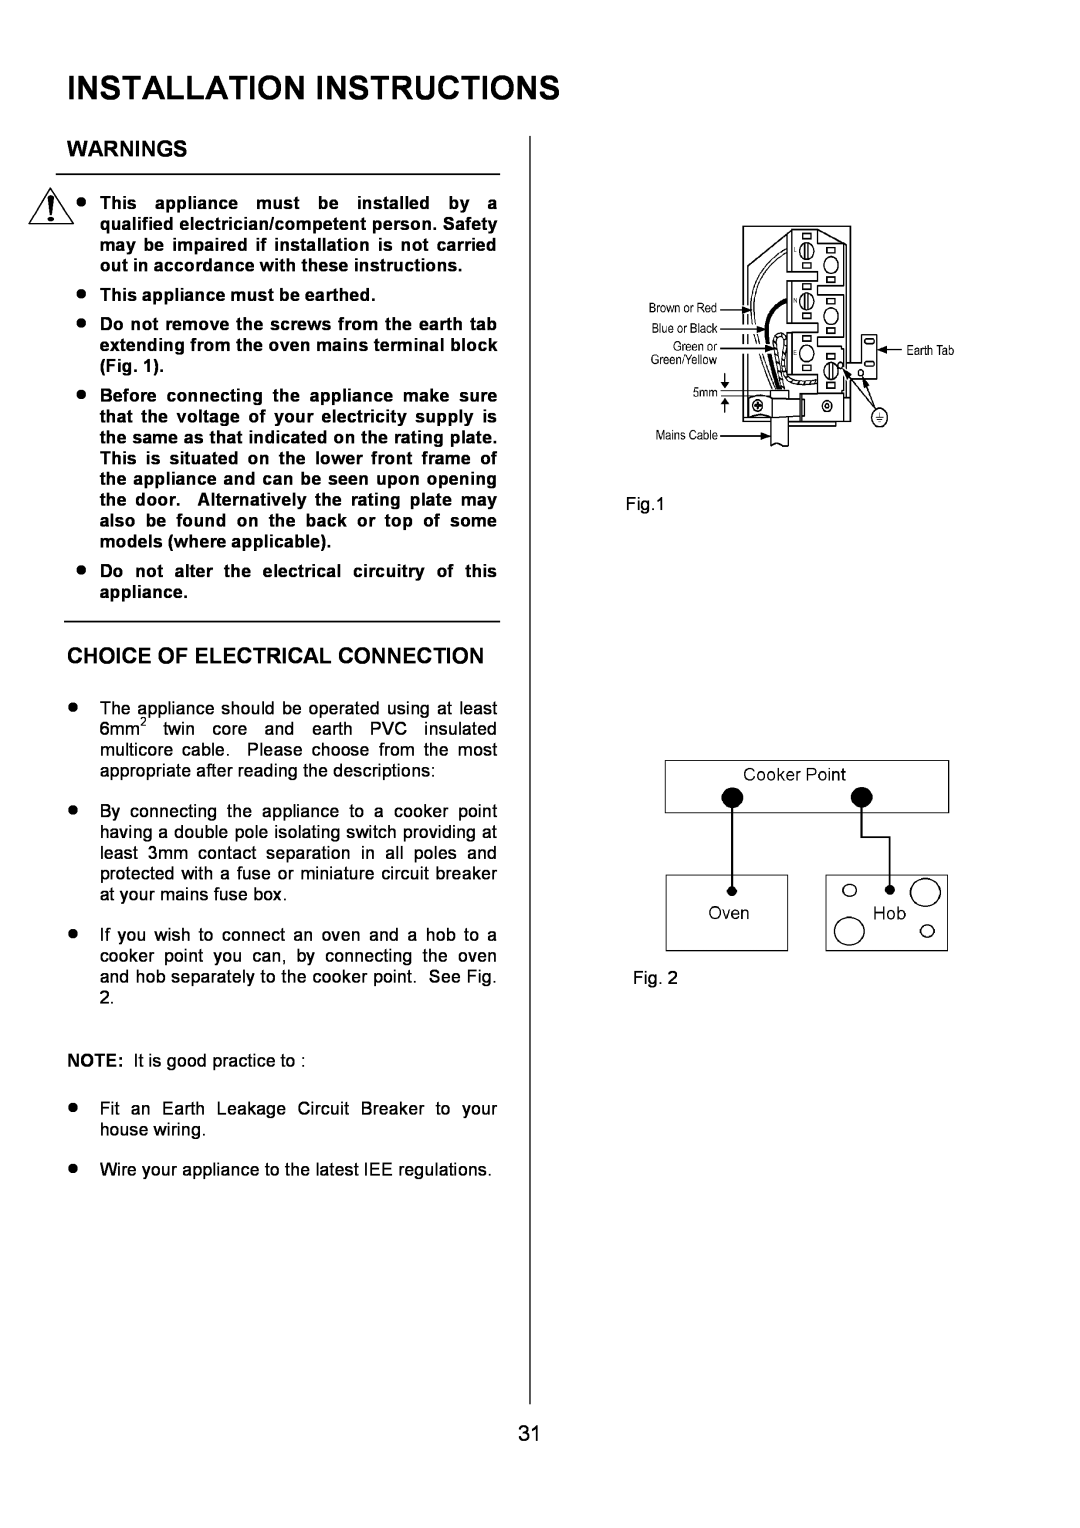 AEG U3100-4 manual Installation Instructions, Warnings, Choice Of Electrical Connection, This appliance must be earthed 